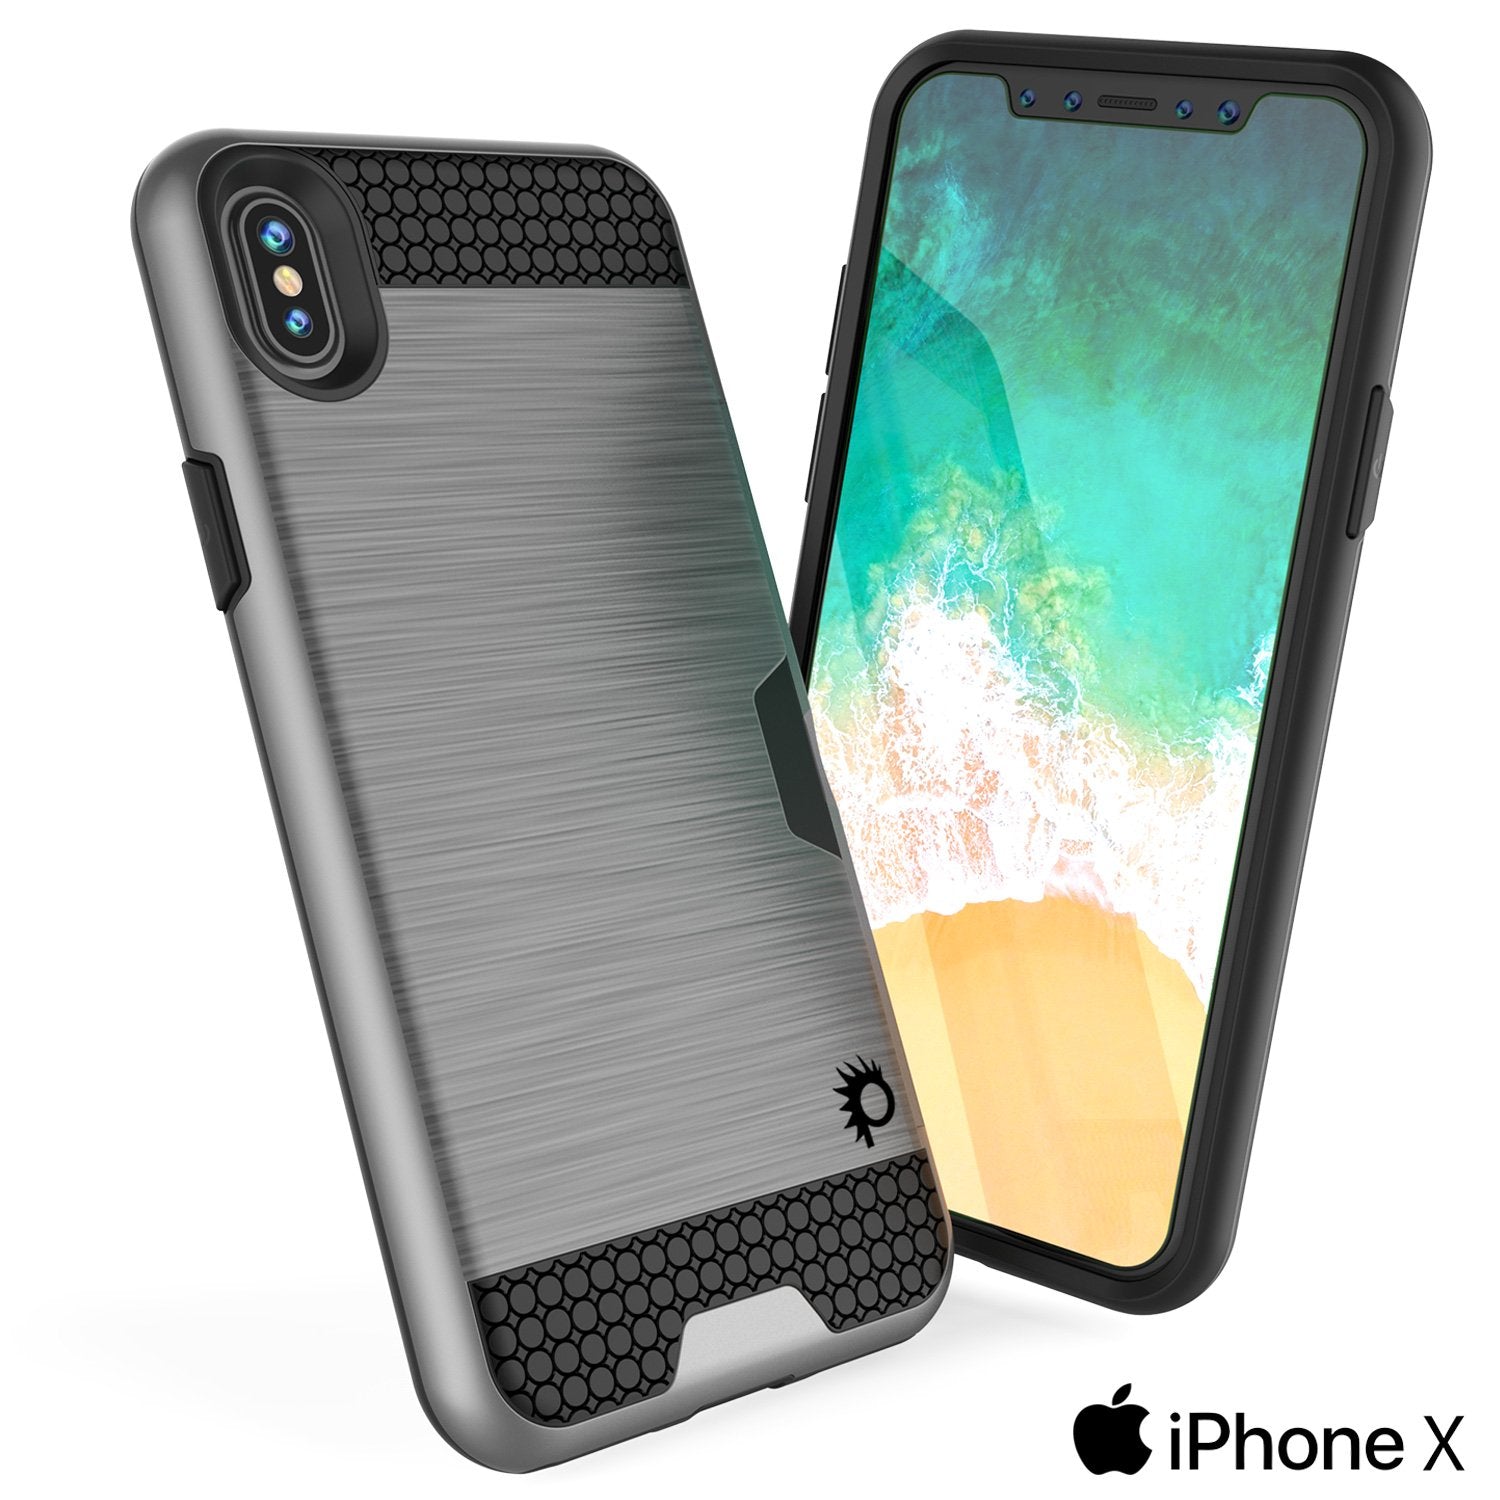 iPhone X Case, PUNKcase [SLOT Series] Slim Fit Dual-Layer Armor Cover & Tempered Glass PUNKSHIELD Screen Protector for Apple iPhone X [Silver] - PunkCase NZ